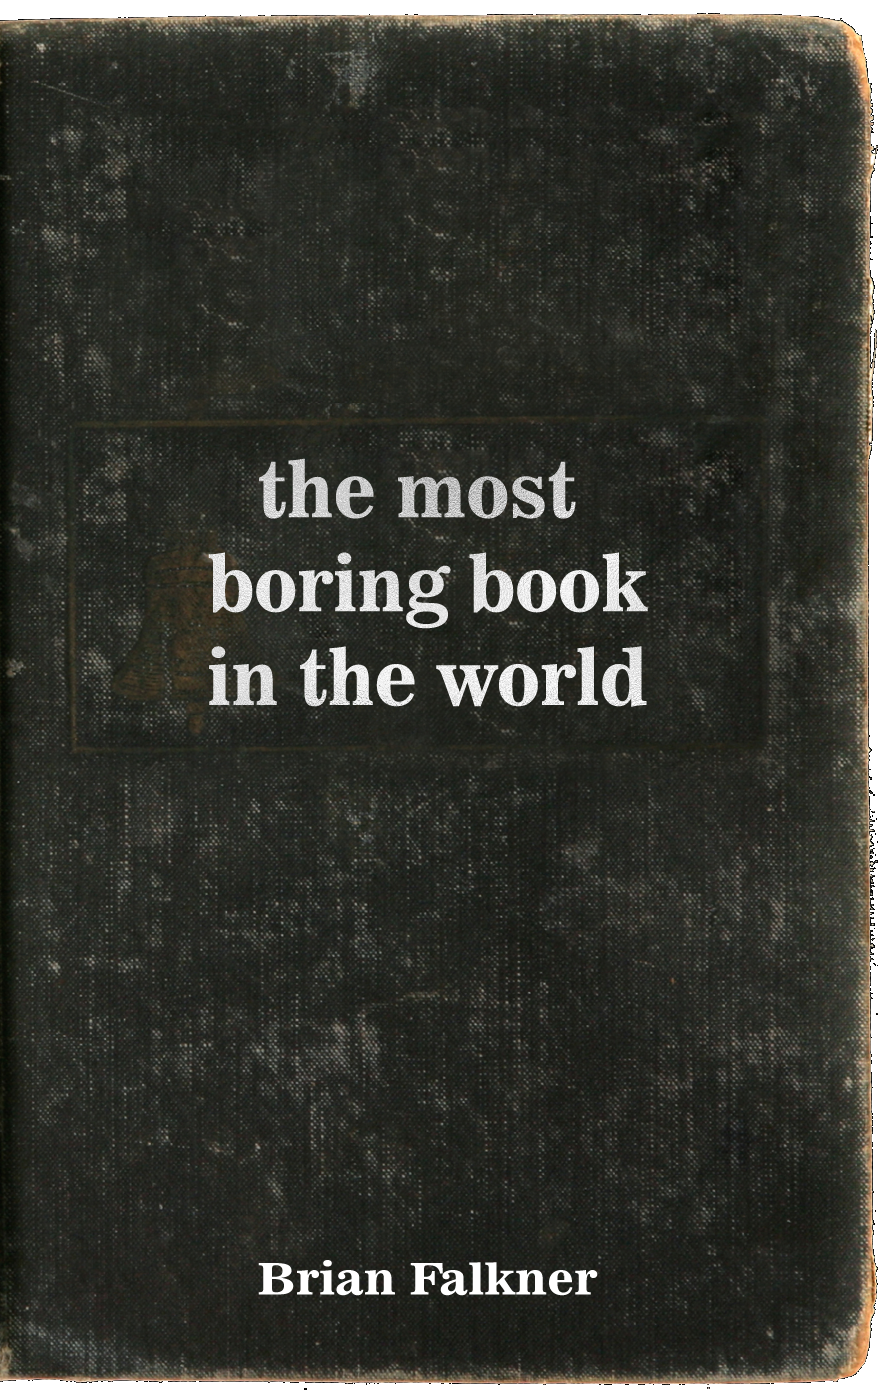 The Most Boring Book in the World